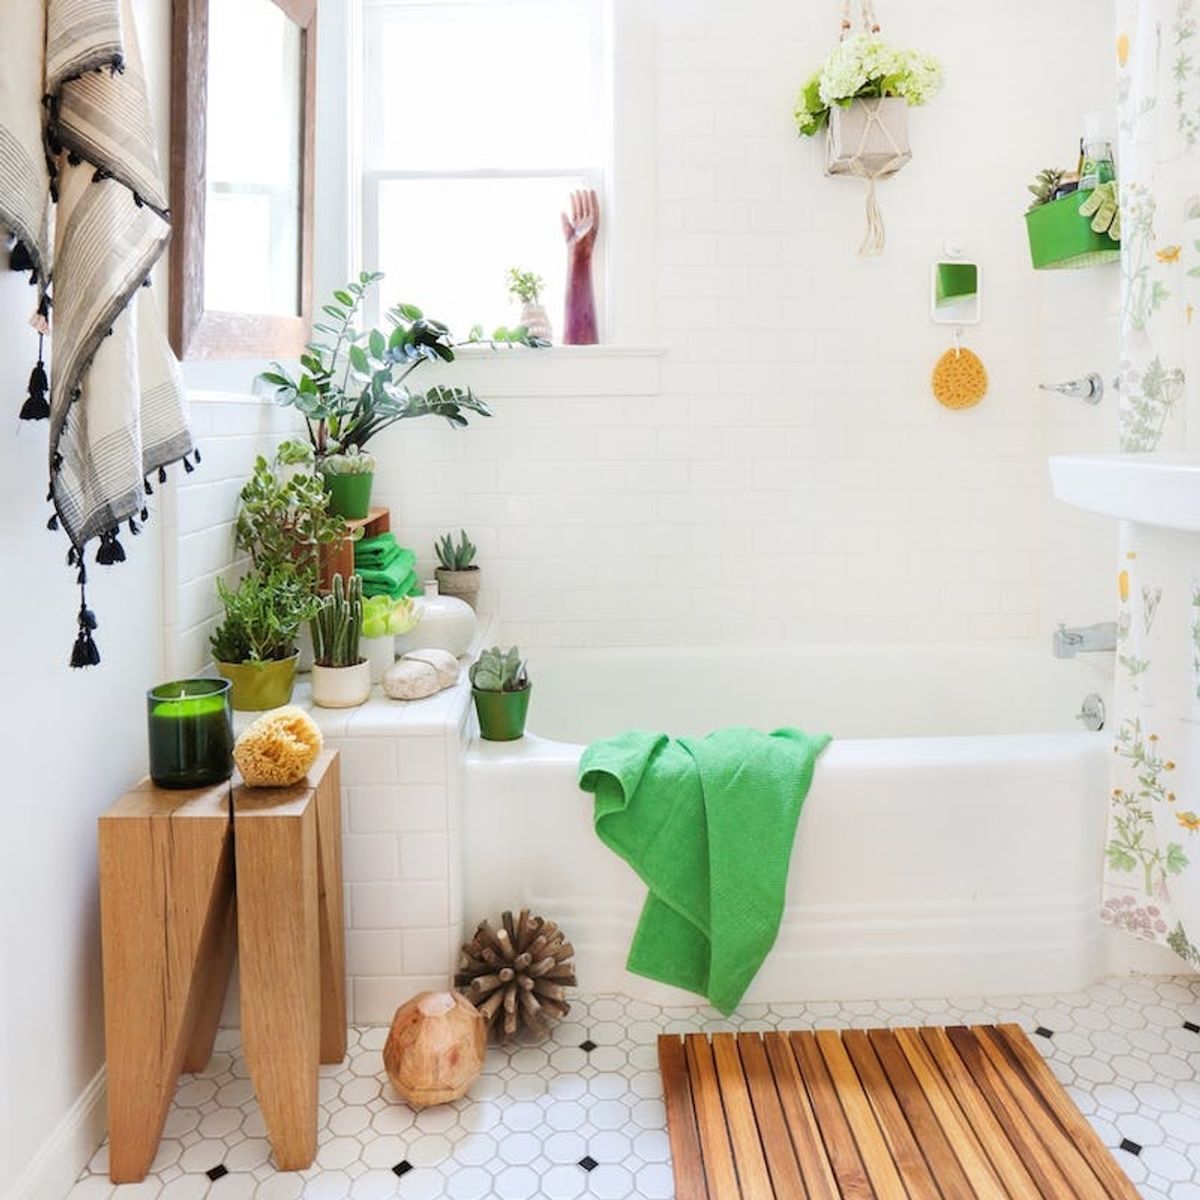 15 Ways to Make Over Your Small Bathroom Into a Spa-Worthy Escape